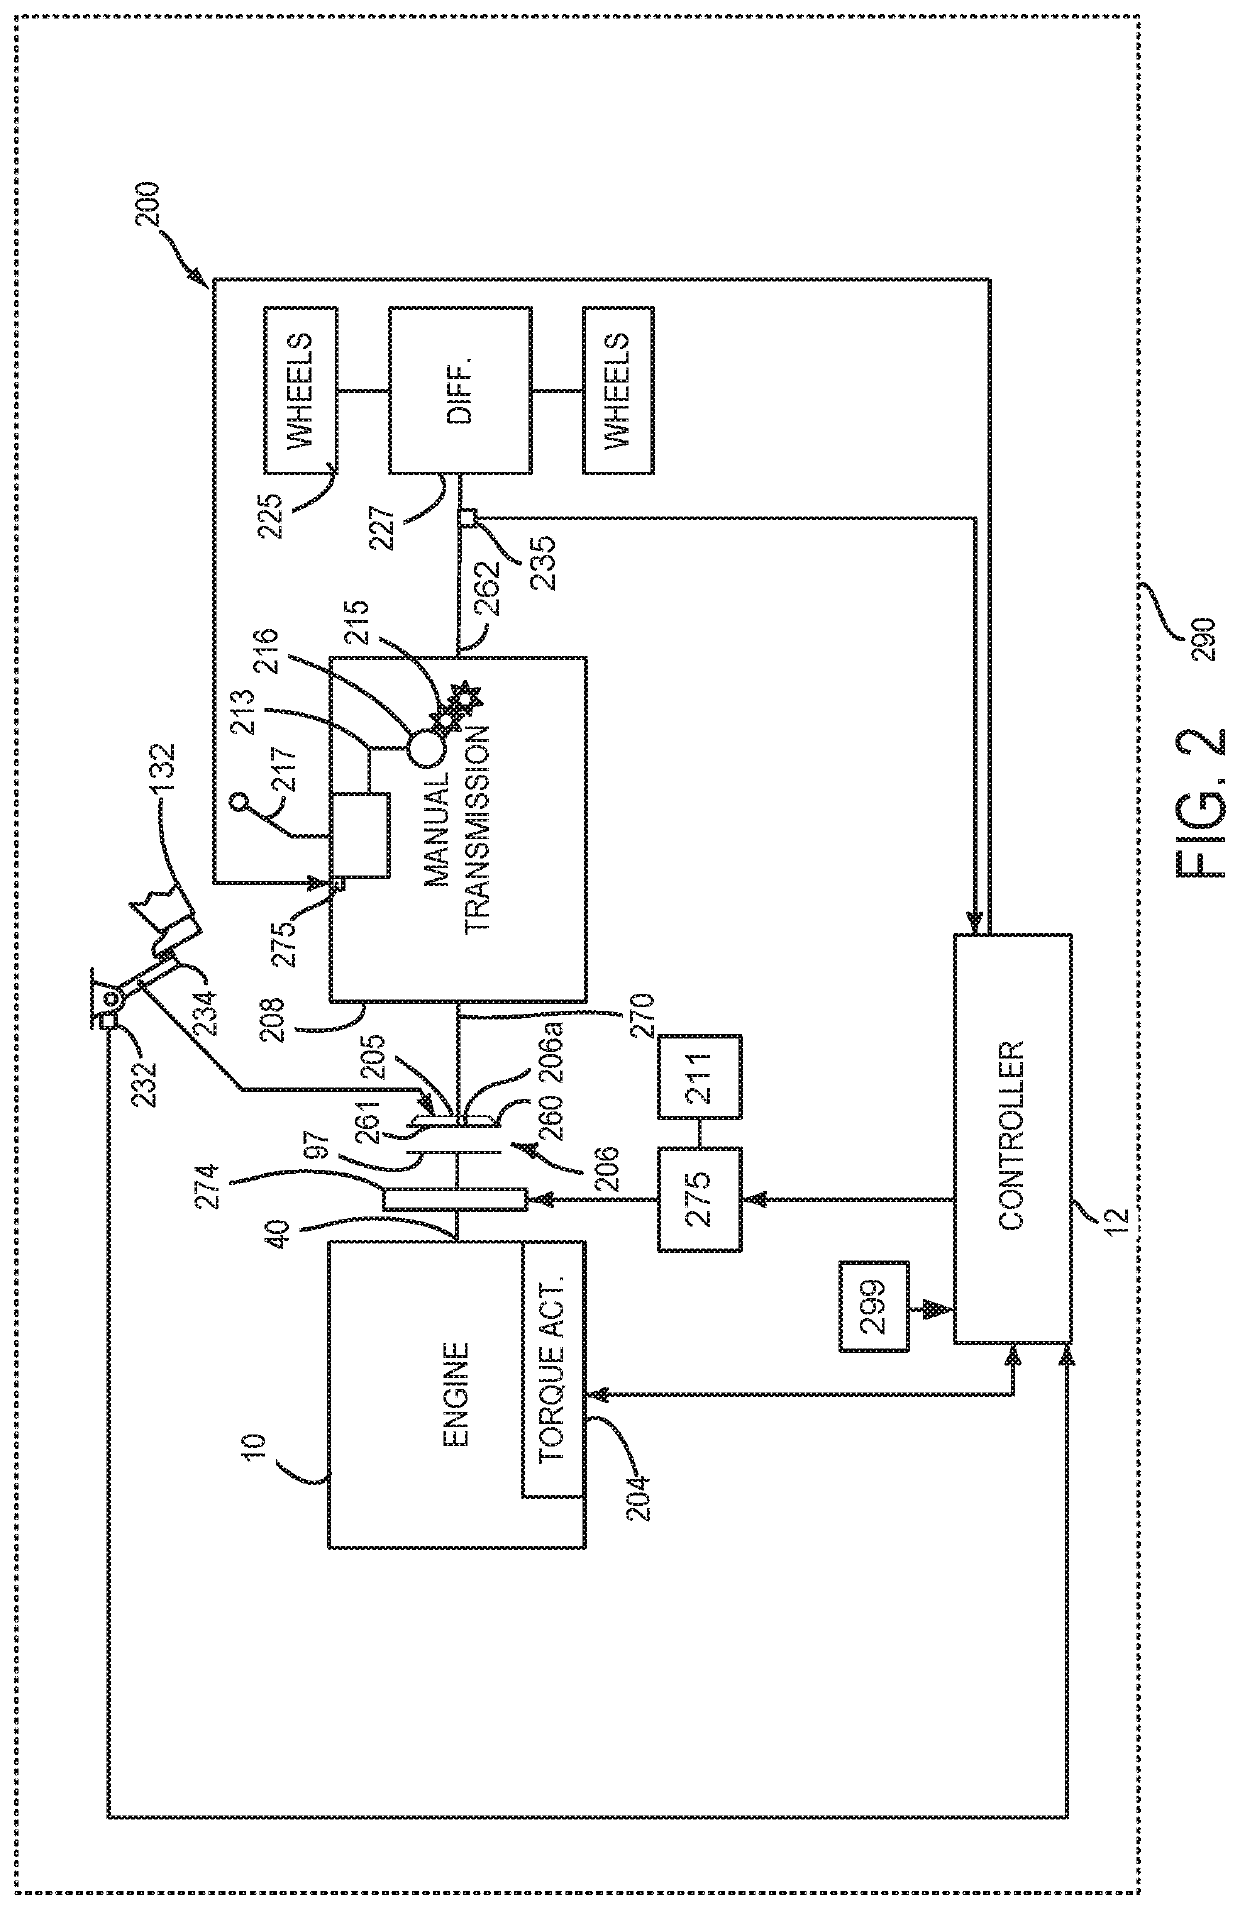 Systems and methods for operating a hybrid vehicle with a manual shift transmission